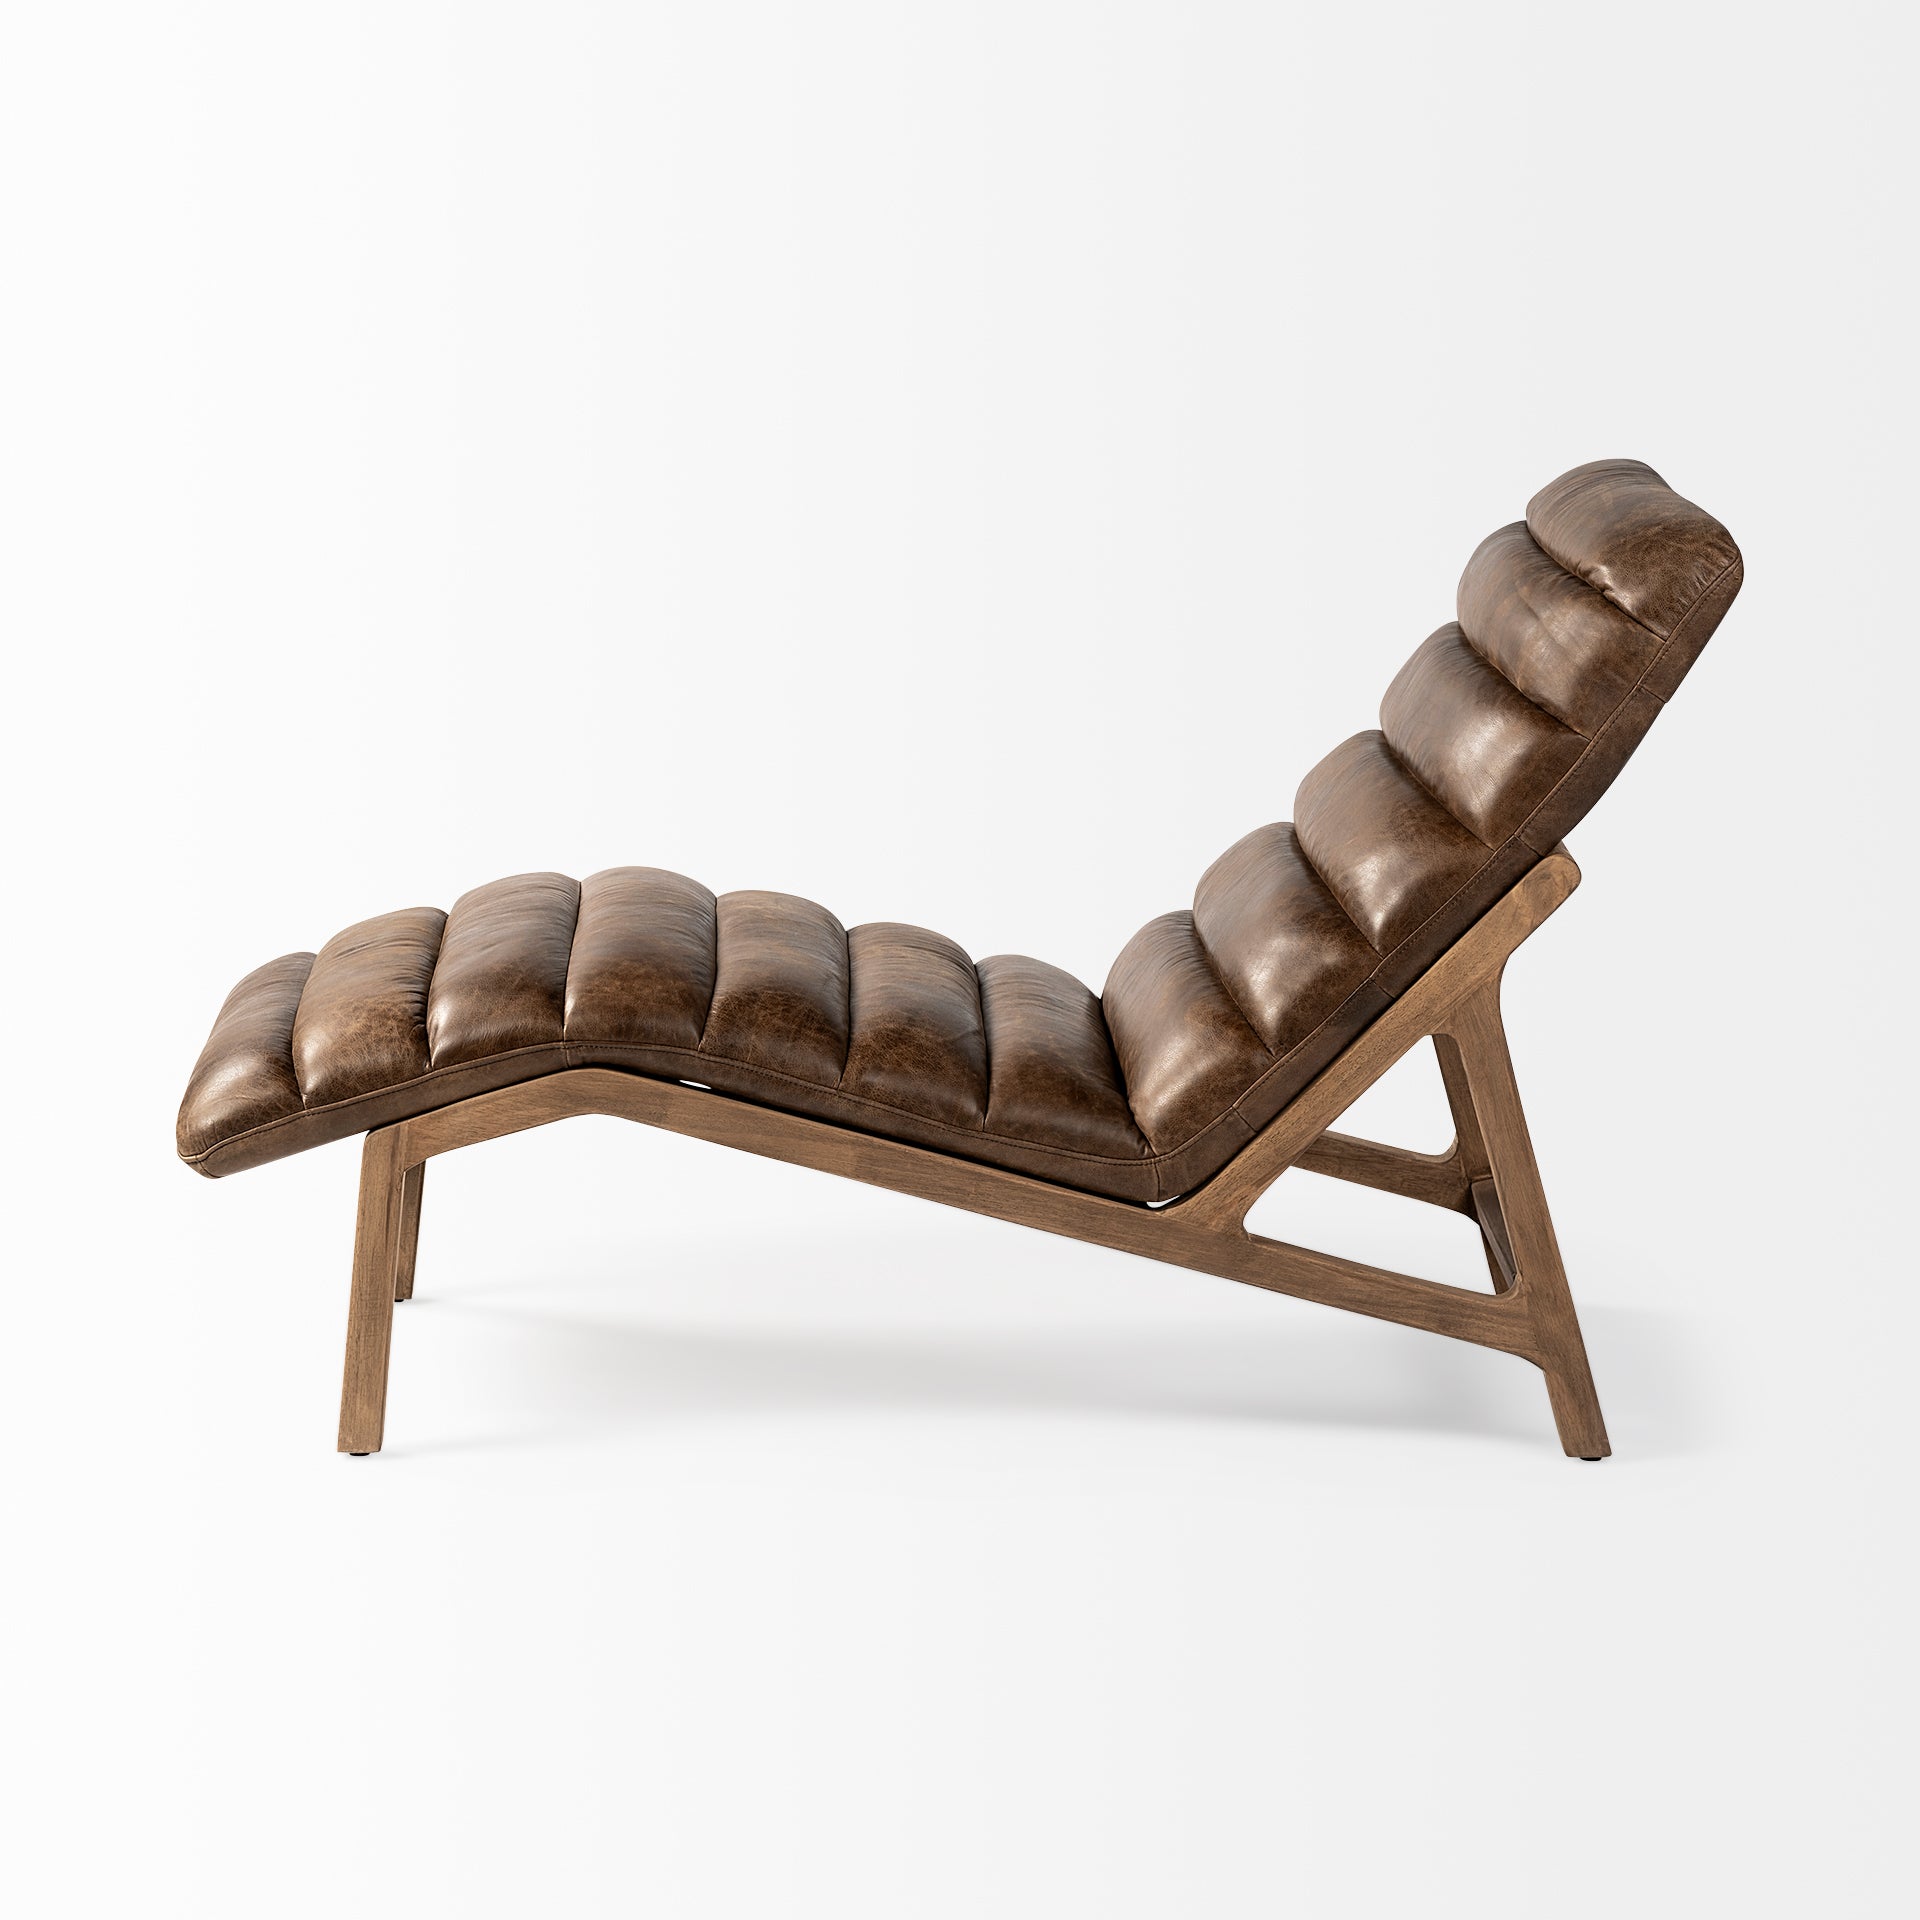 Pierre Chaise Lounge